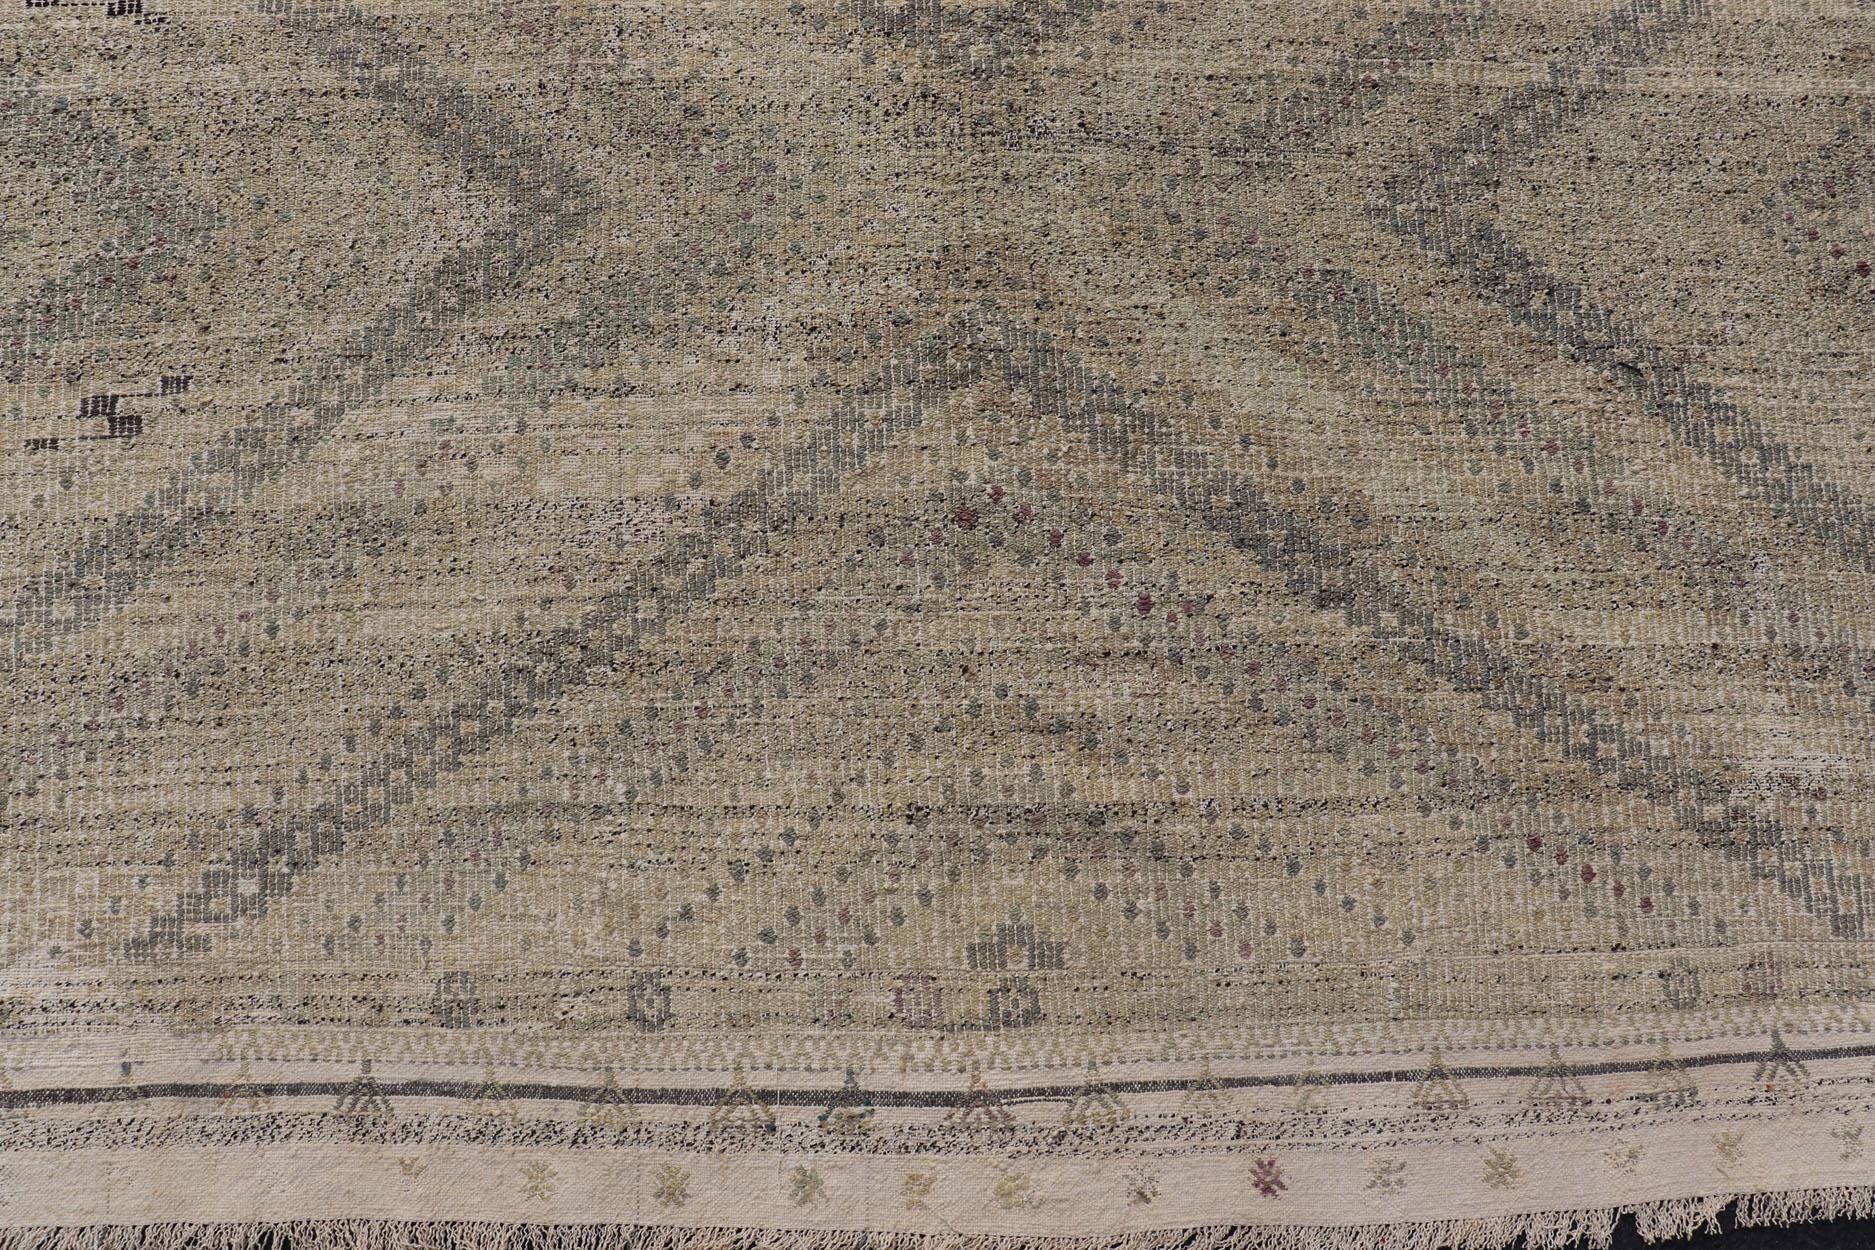 Vintage Turkish Embroidered Flat-Weave Rug with Neutral-Toned Geometric Design For Sale 6